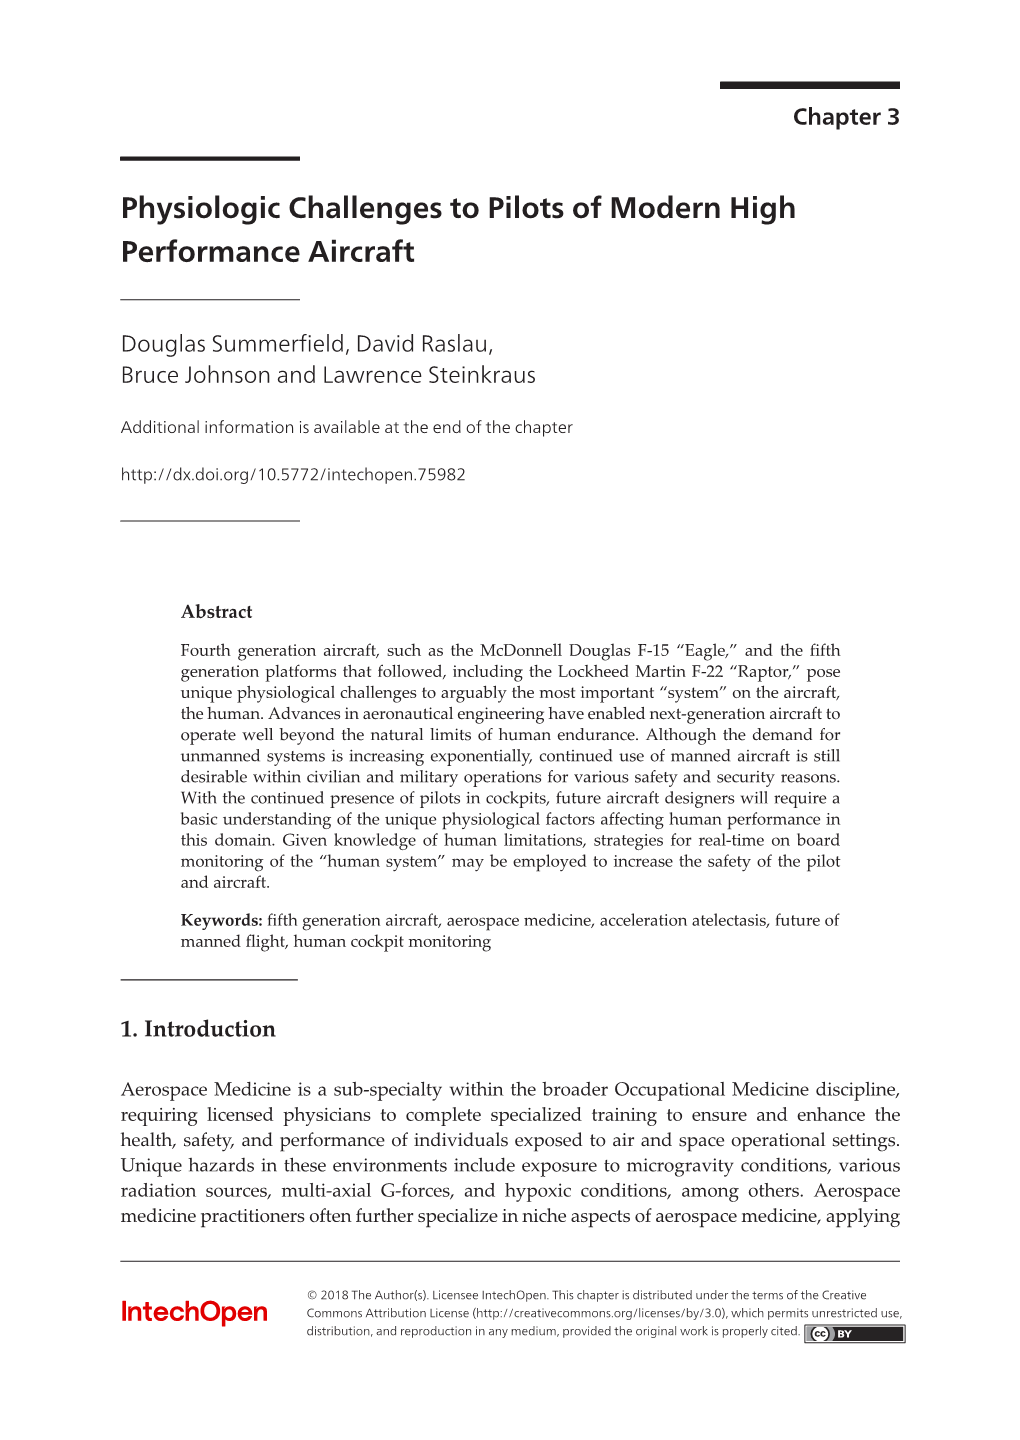 Physiologic Challenges to Pilots of Modern High Performance Aircraft